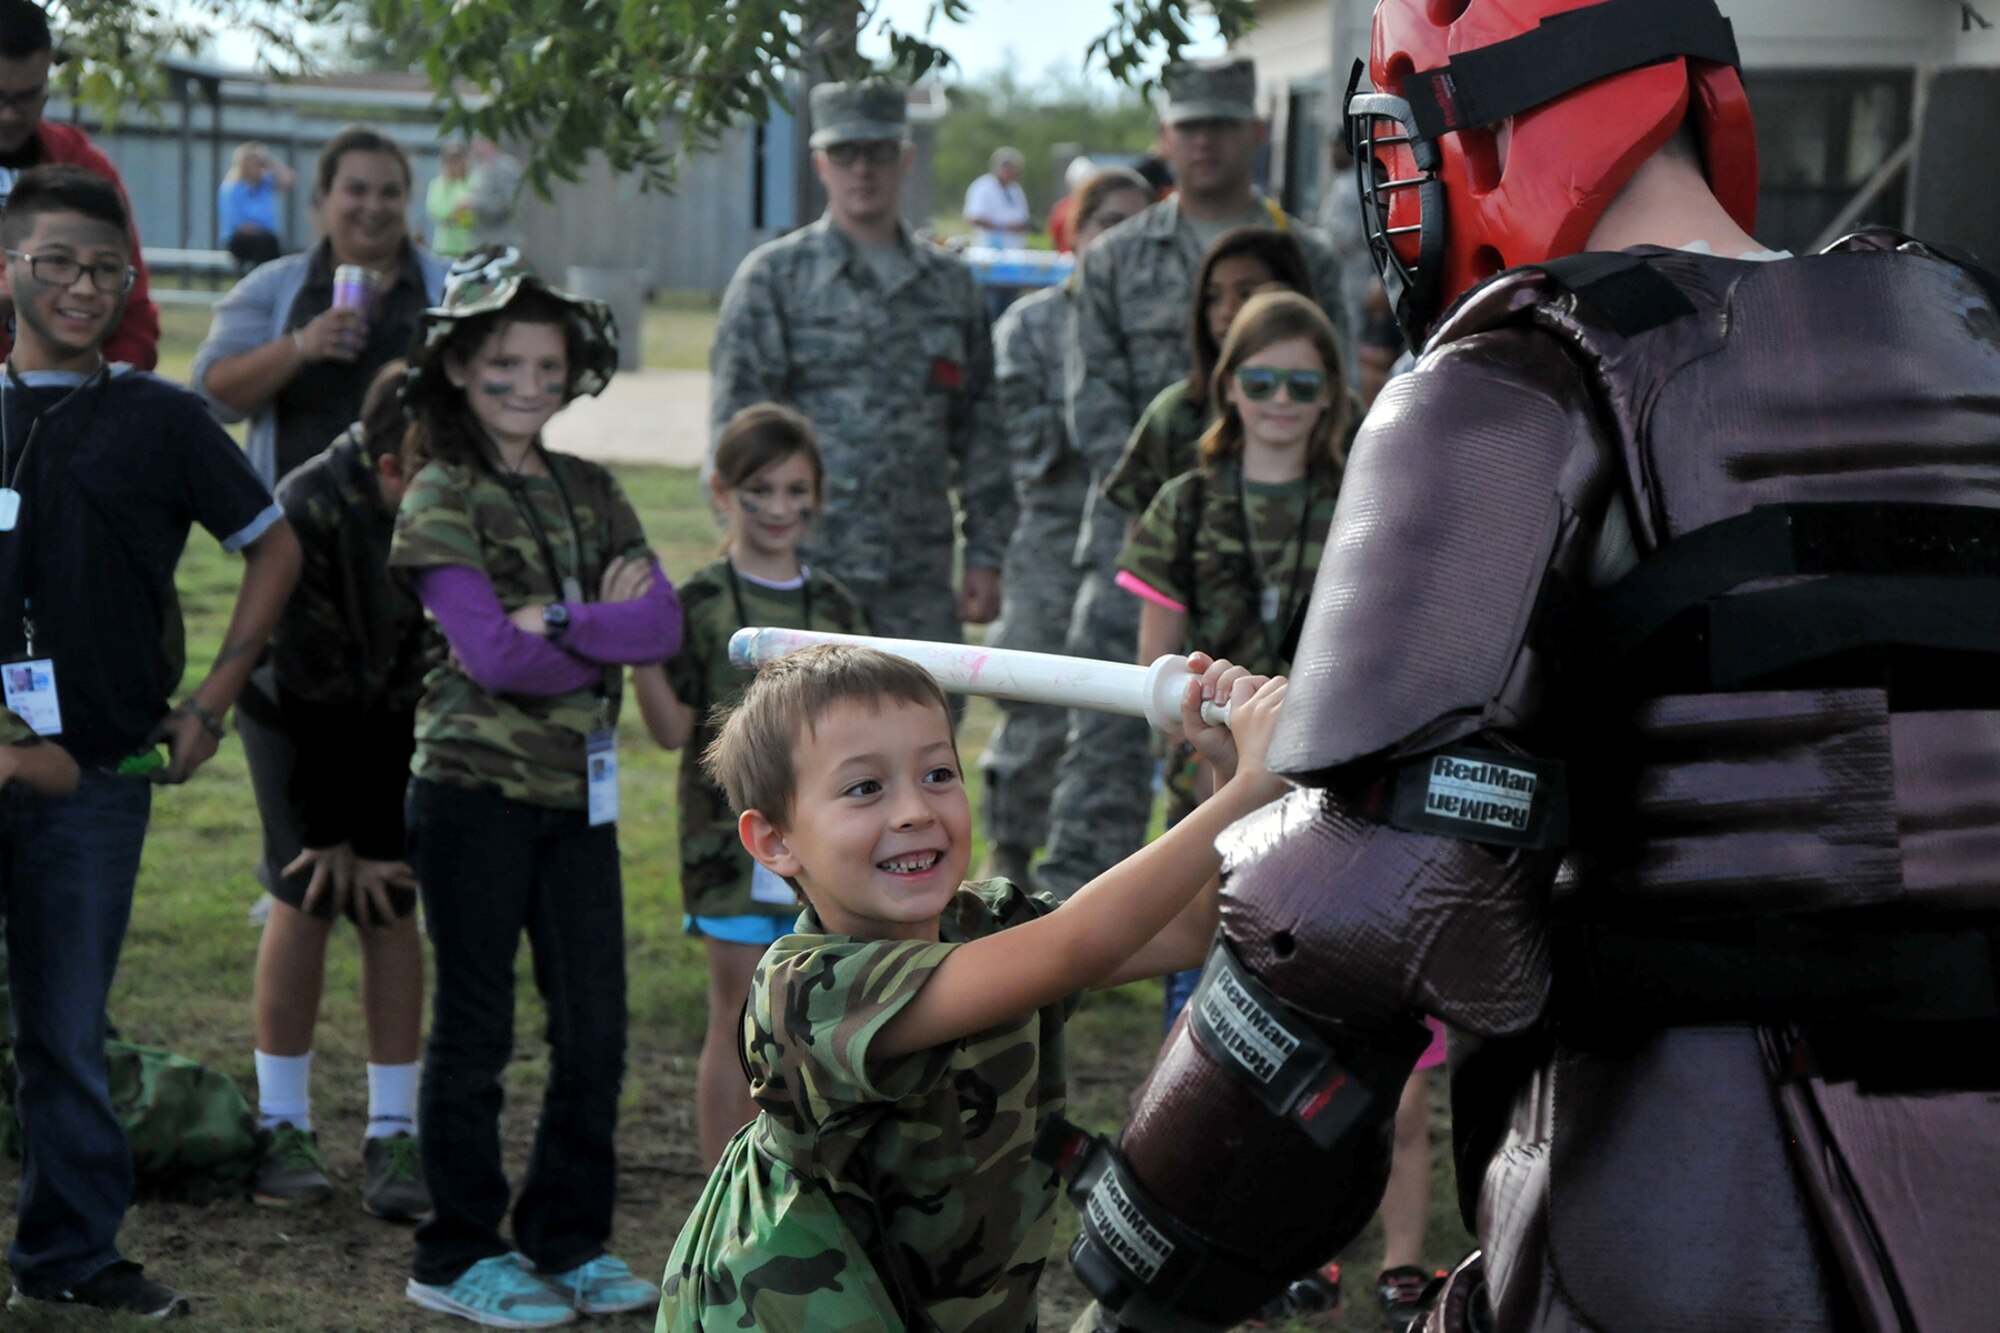 A child swings a dummy baton at a padded Airman during Operation Kids Investigating Deployment Services at the 17th Force Support Squadron on Goodfellow Air Force Base, Texas, Oct. 1, 2016. The 17th Security Forces Squadron gave the children mock pre-deployment training. (U.S. Air Force photo by Airman 1st Class Randall Moose/Released)